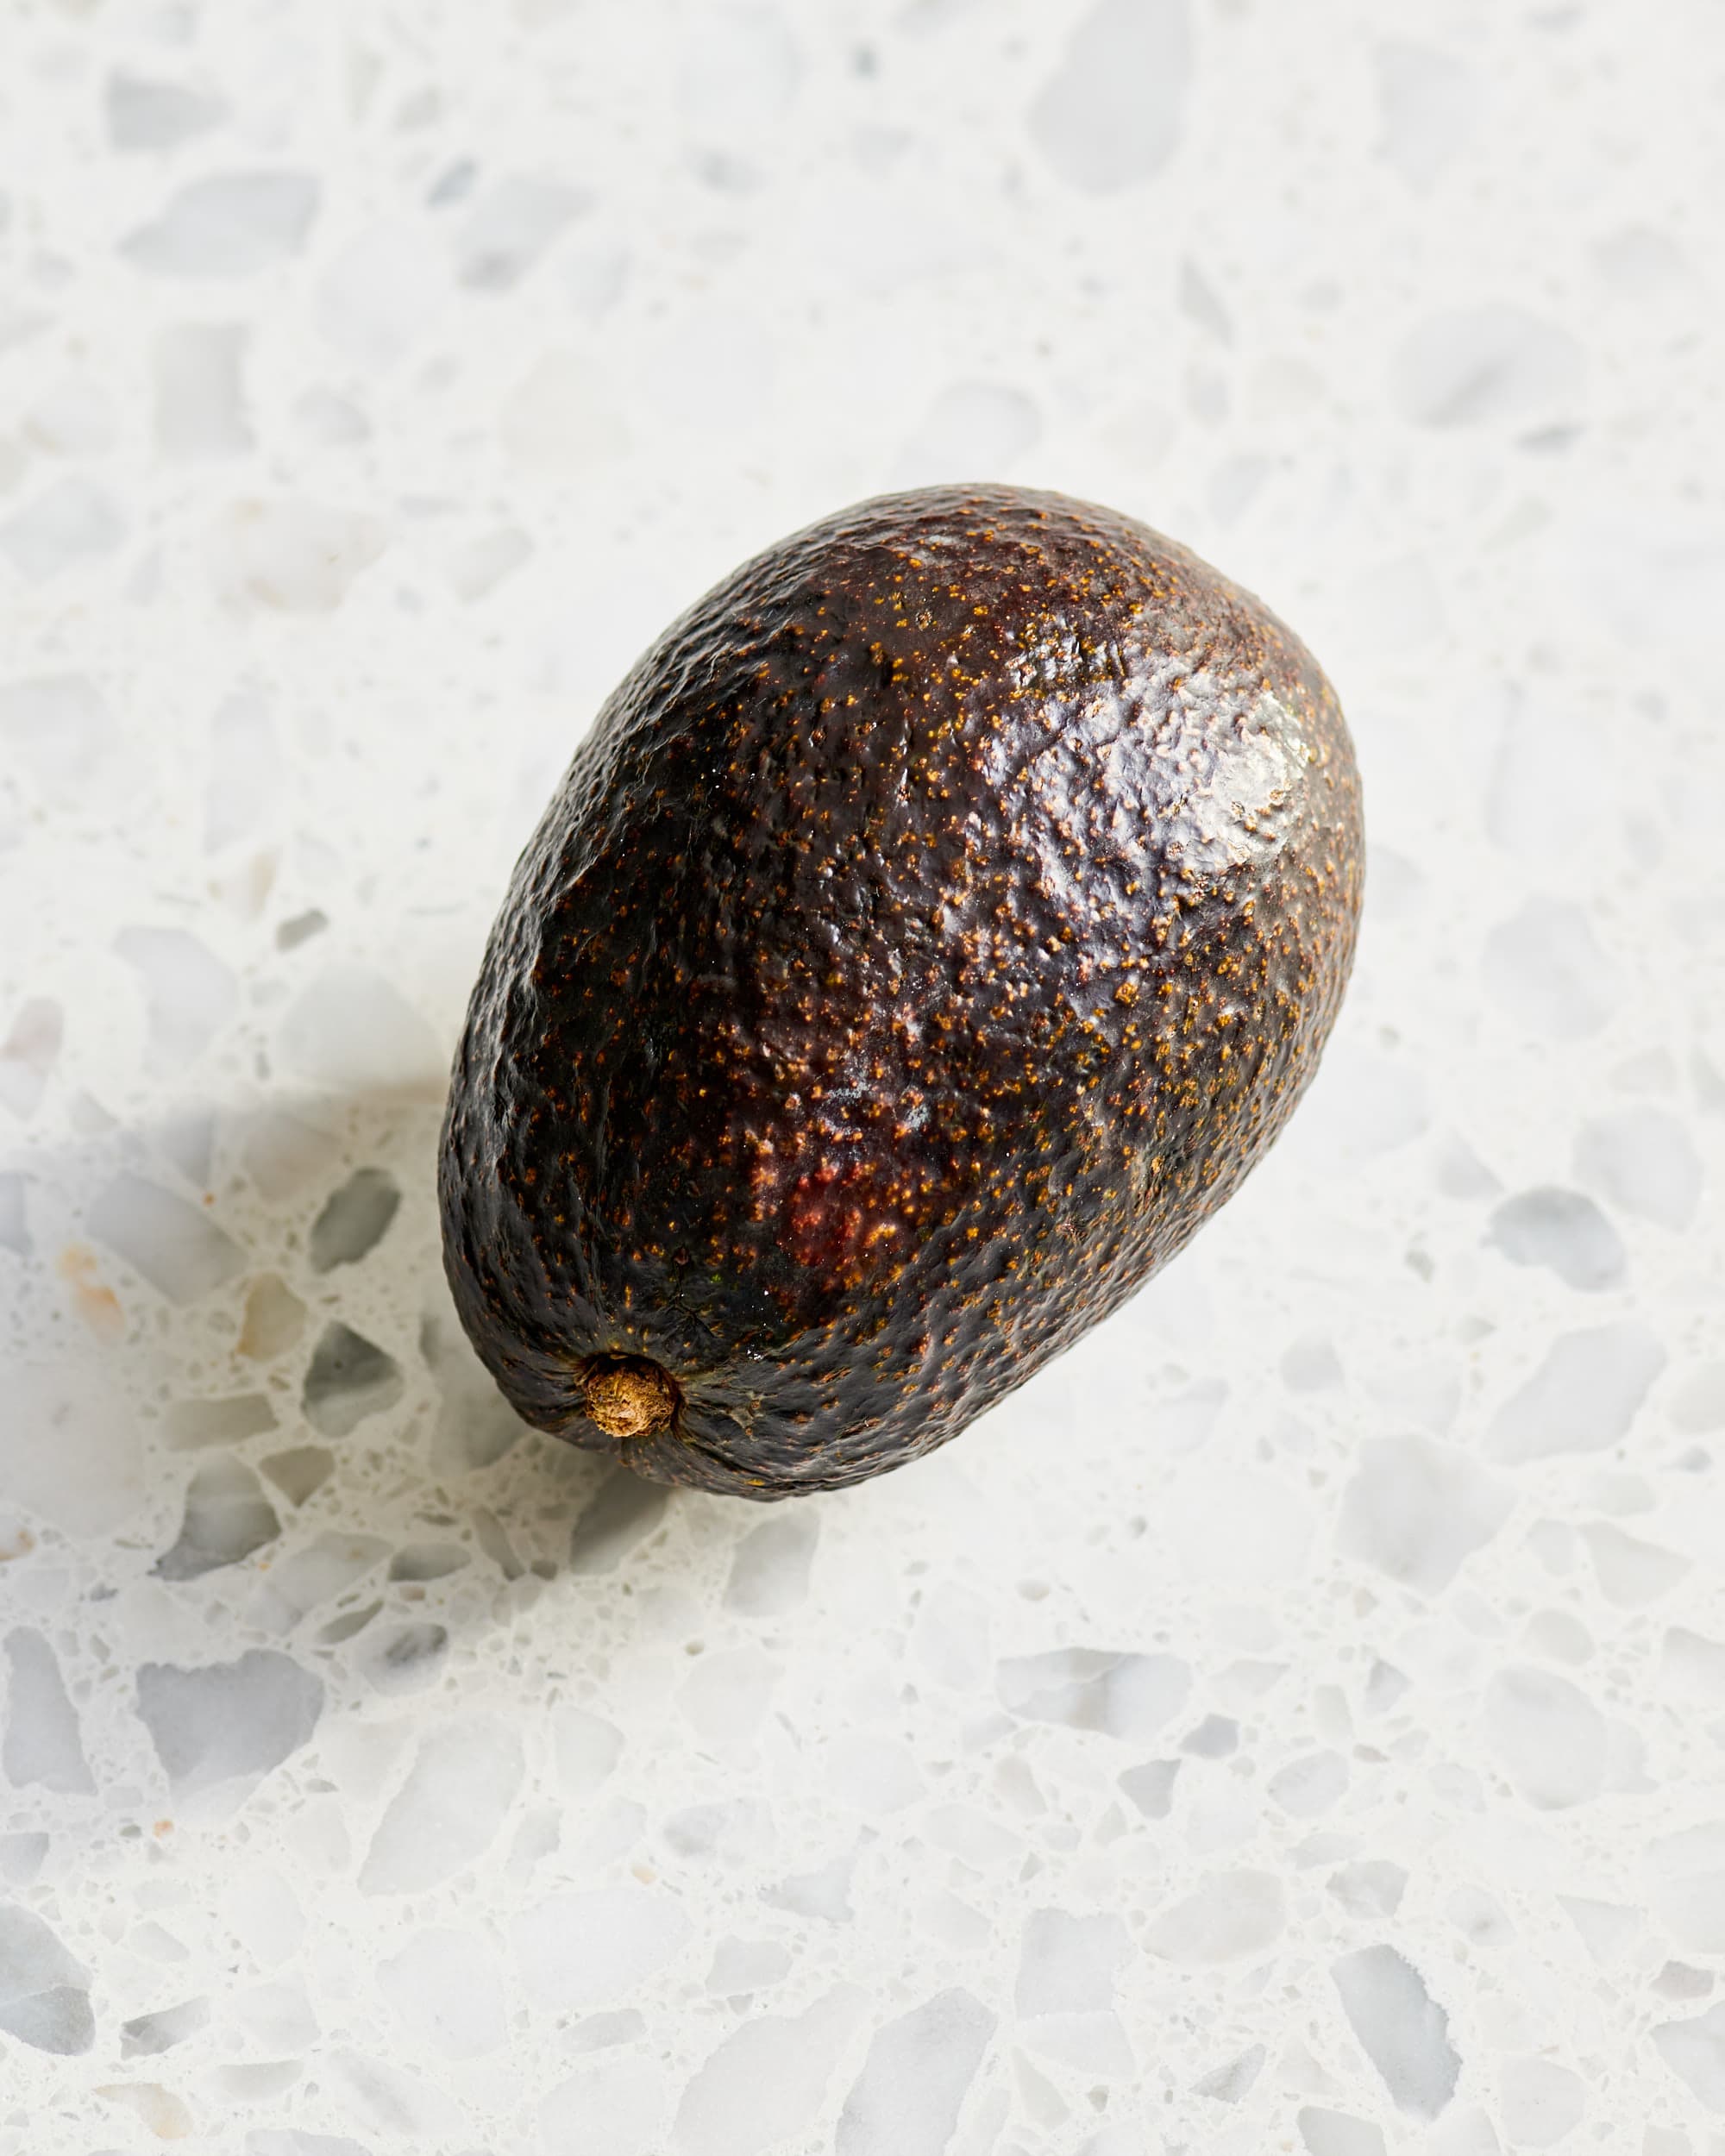 How to Ripen Avocados: 4 Simple Methods and 1 myth